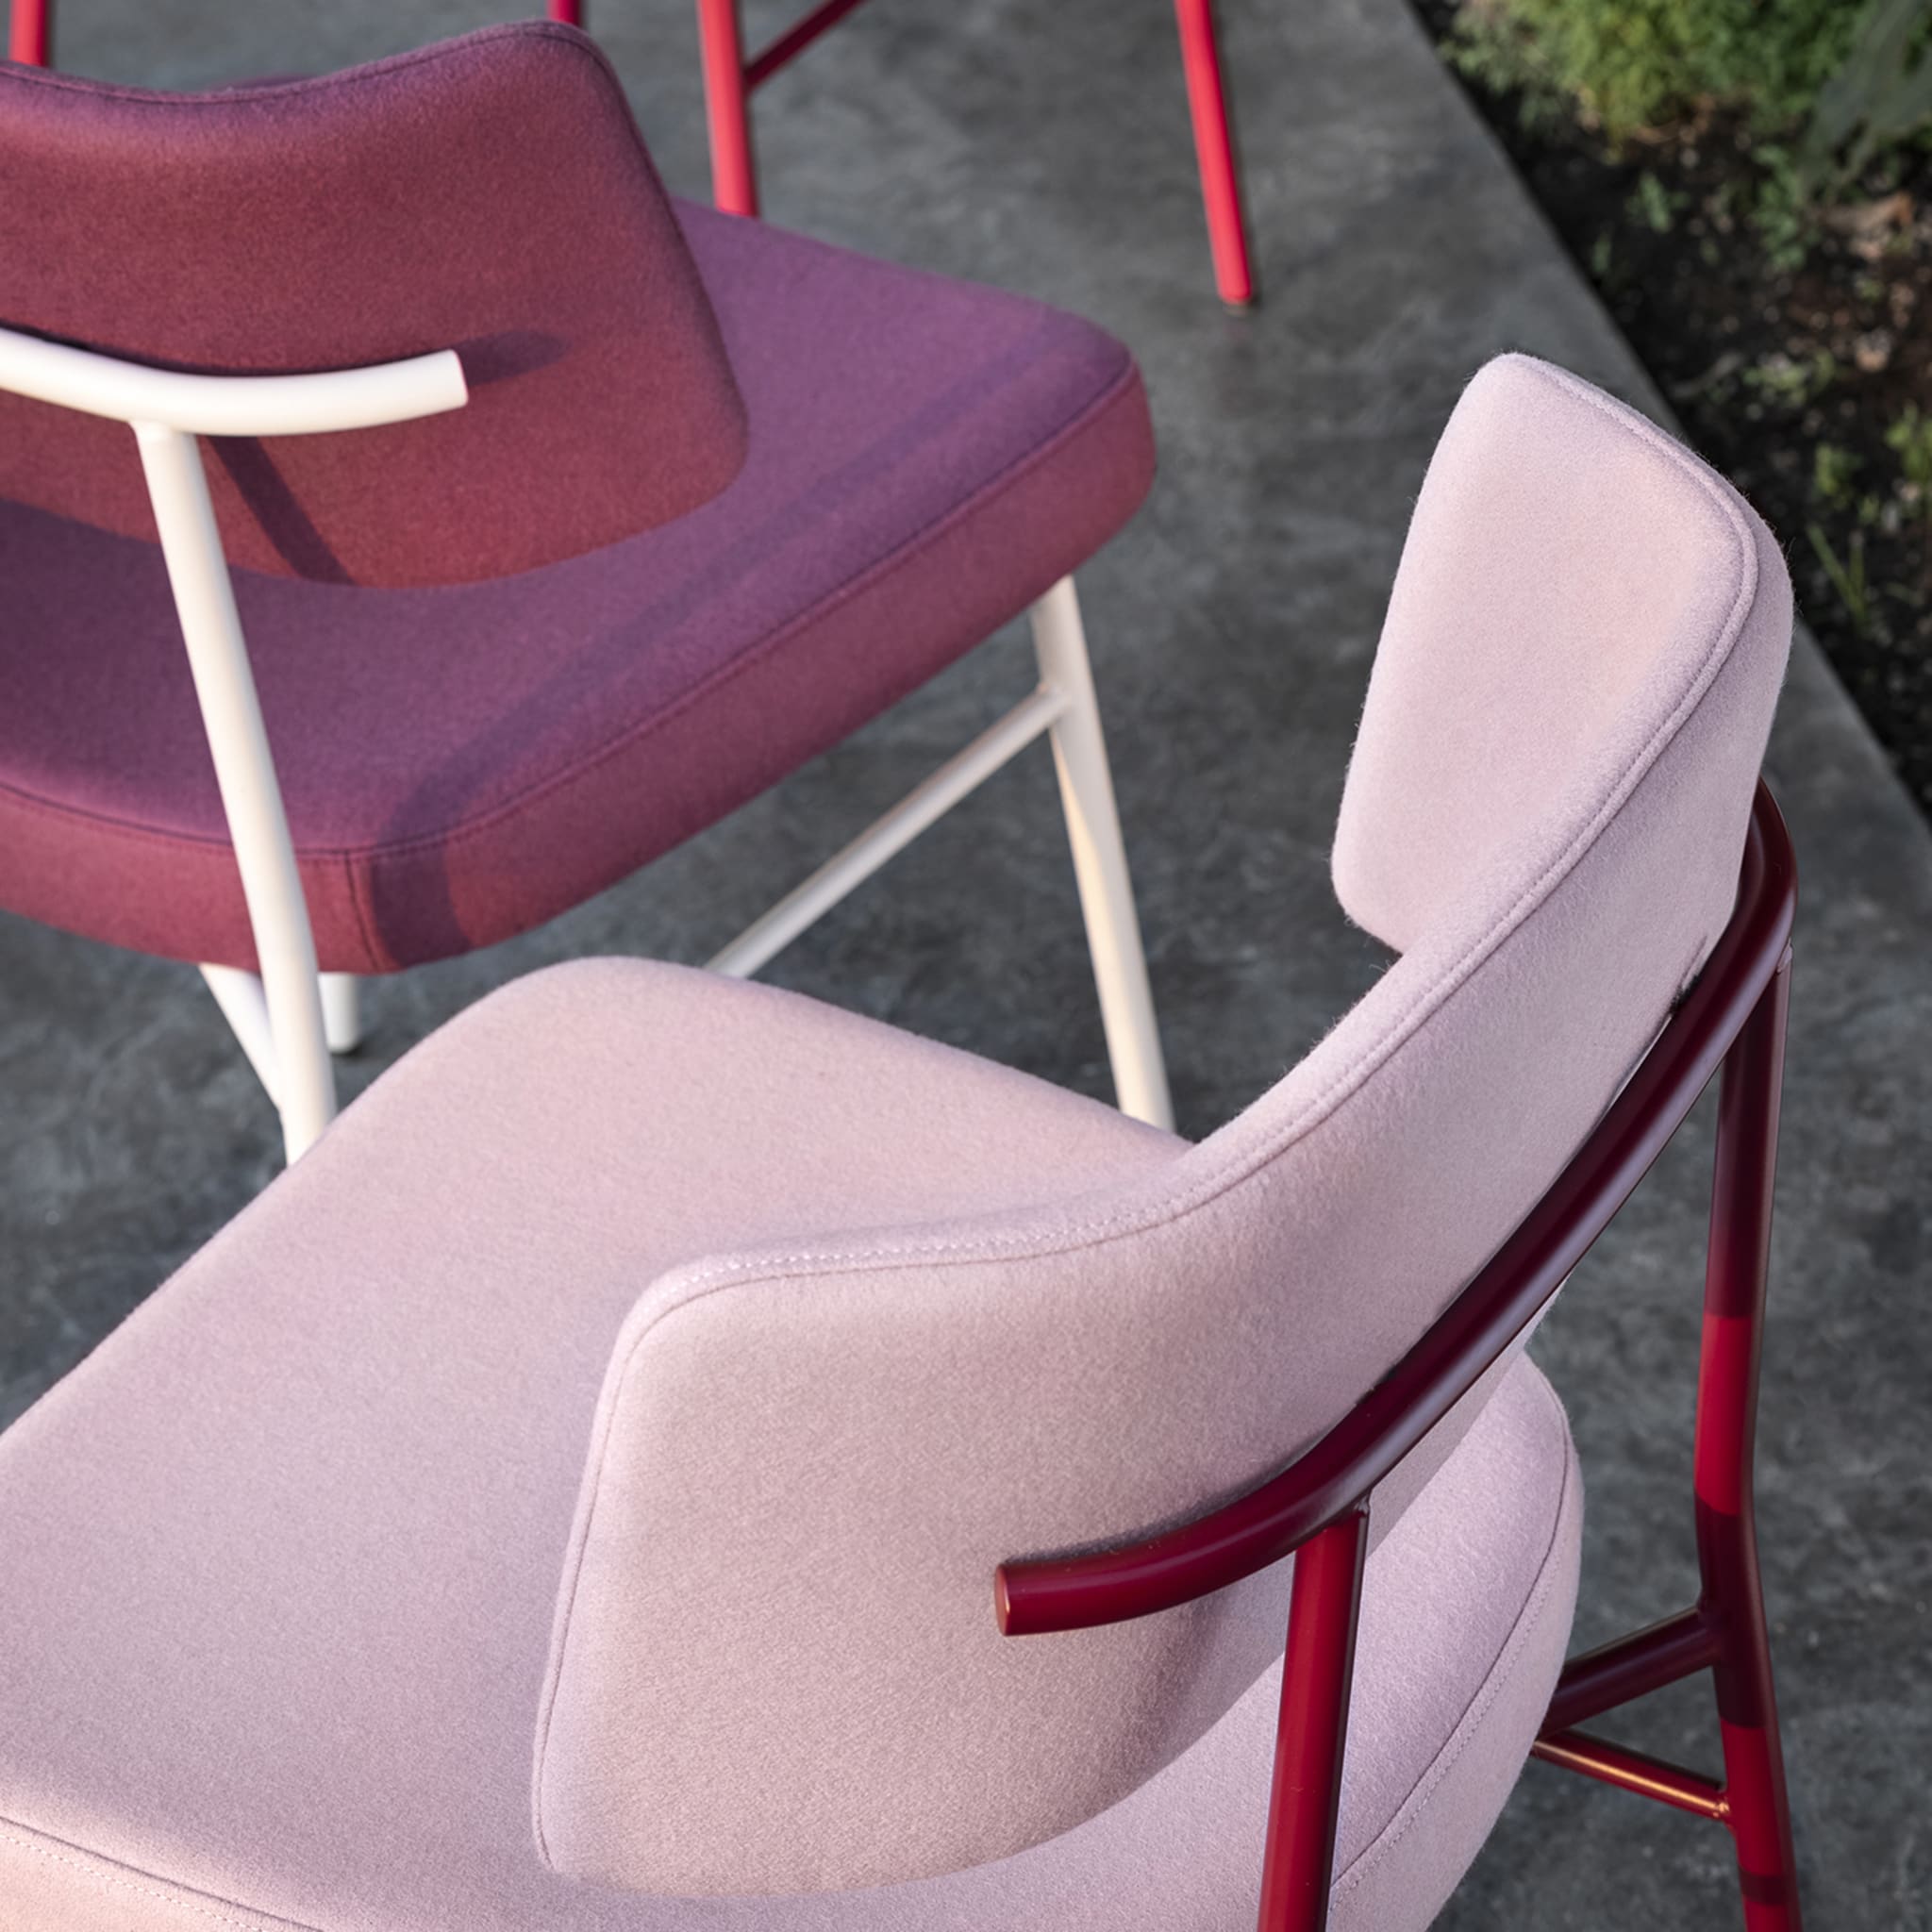 Marlen Pink and Burgundy Chair by EP Studio - Alternative view 2